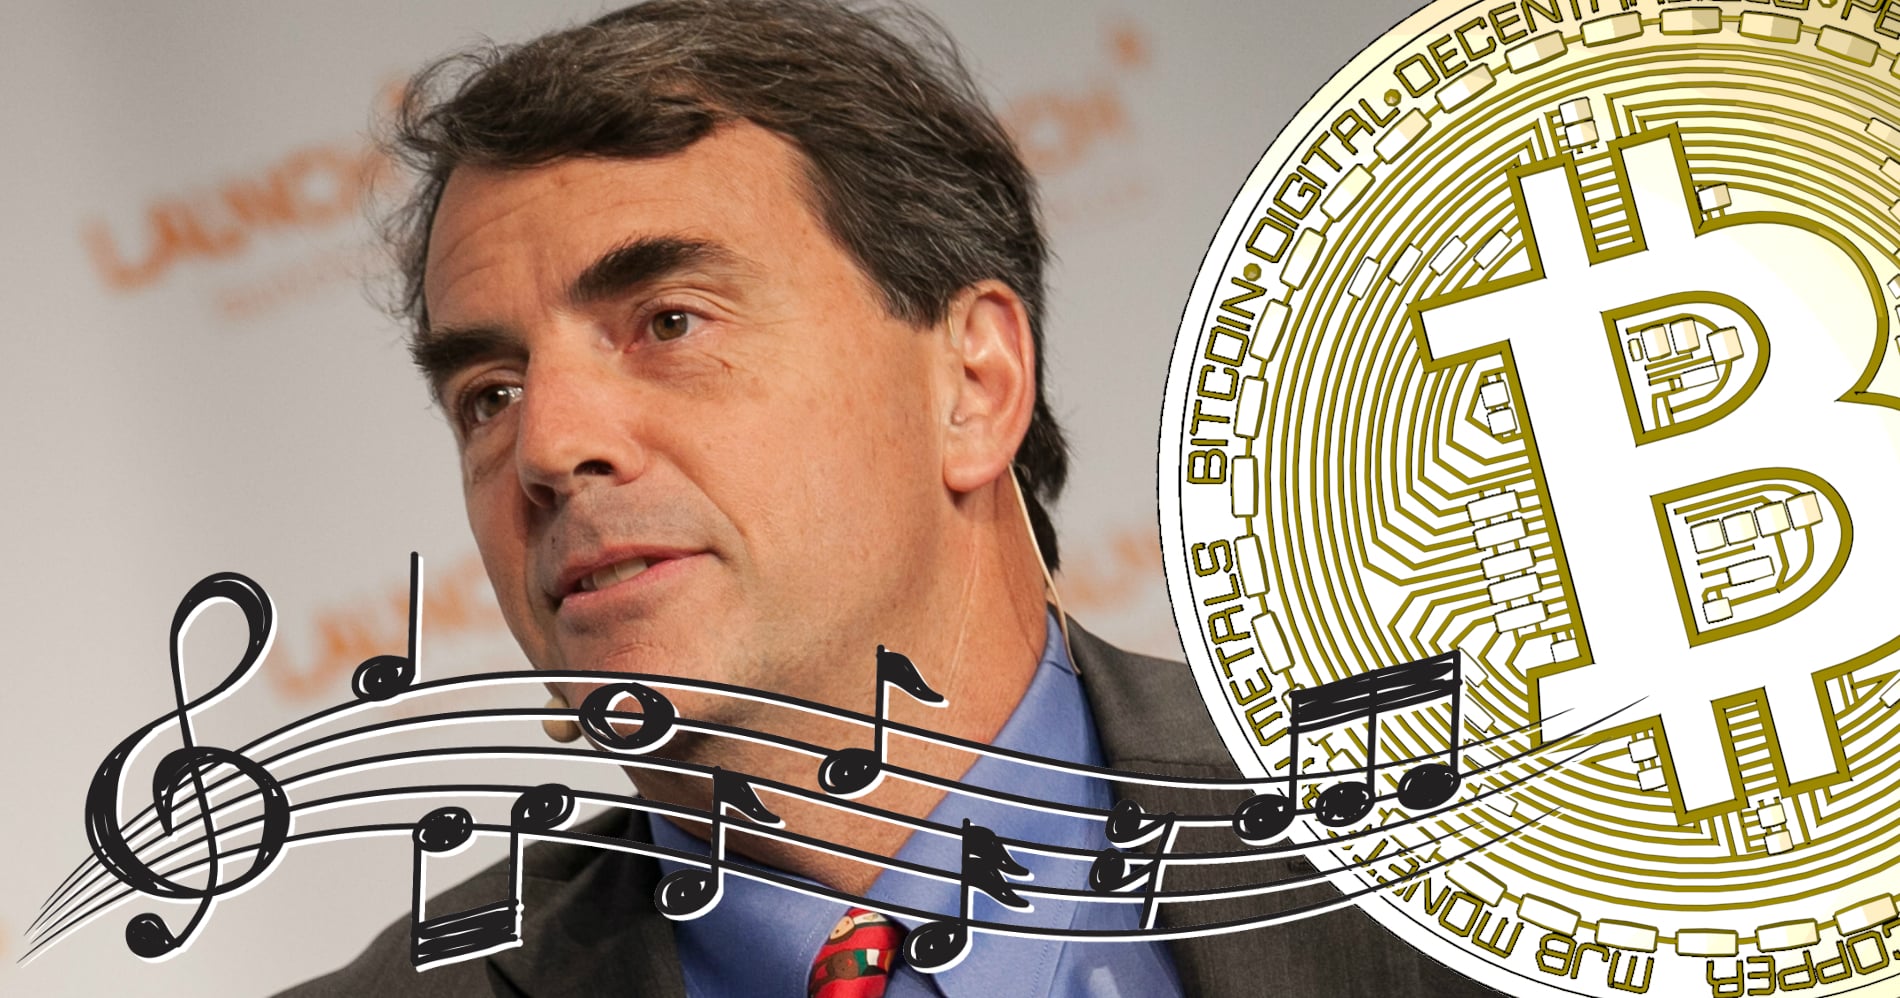 Tim Draper just released a song about bitcoin - listen to it here